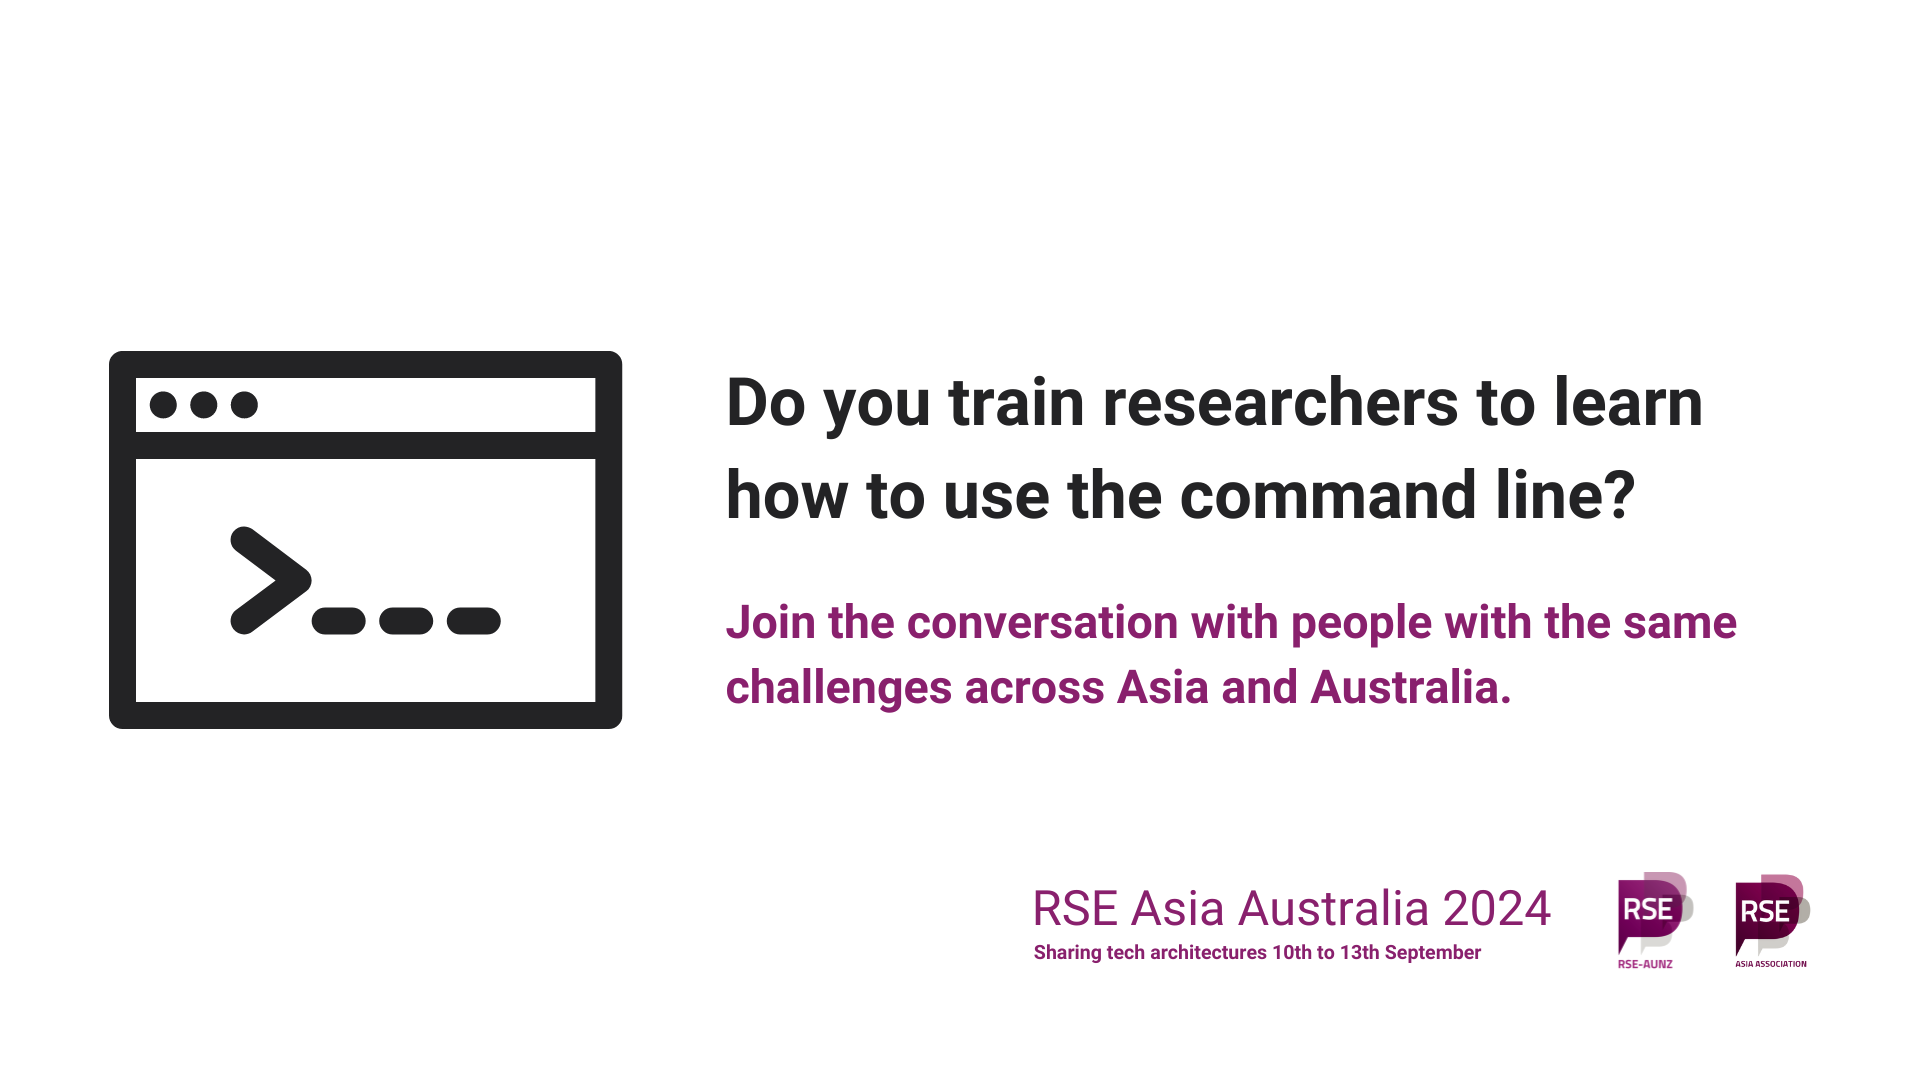 Stylised command line window. Do you train researchers to learn how to use the command line? Join the conversation with people with the same challenges across Asia and Australia. RSE Asia Australia 2024. Sharing tech architectures. 10th to 13th September. Logos of RSE AUNZ and RSE Asia.